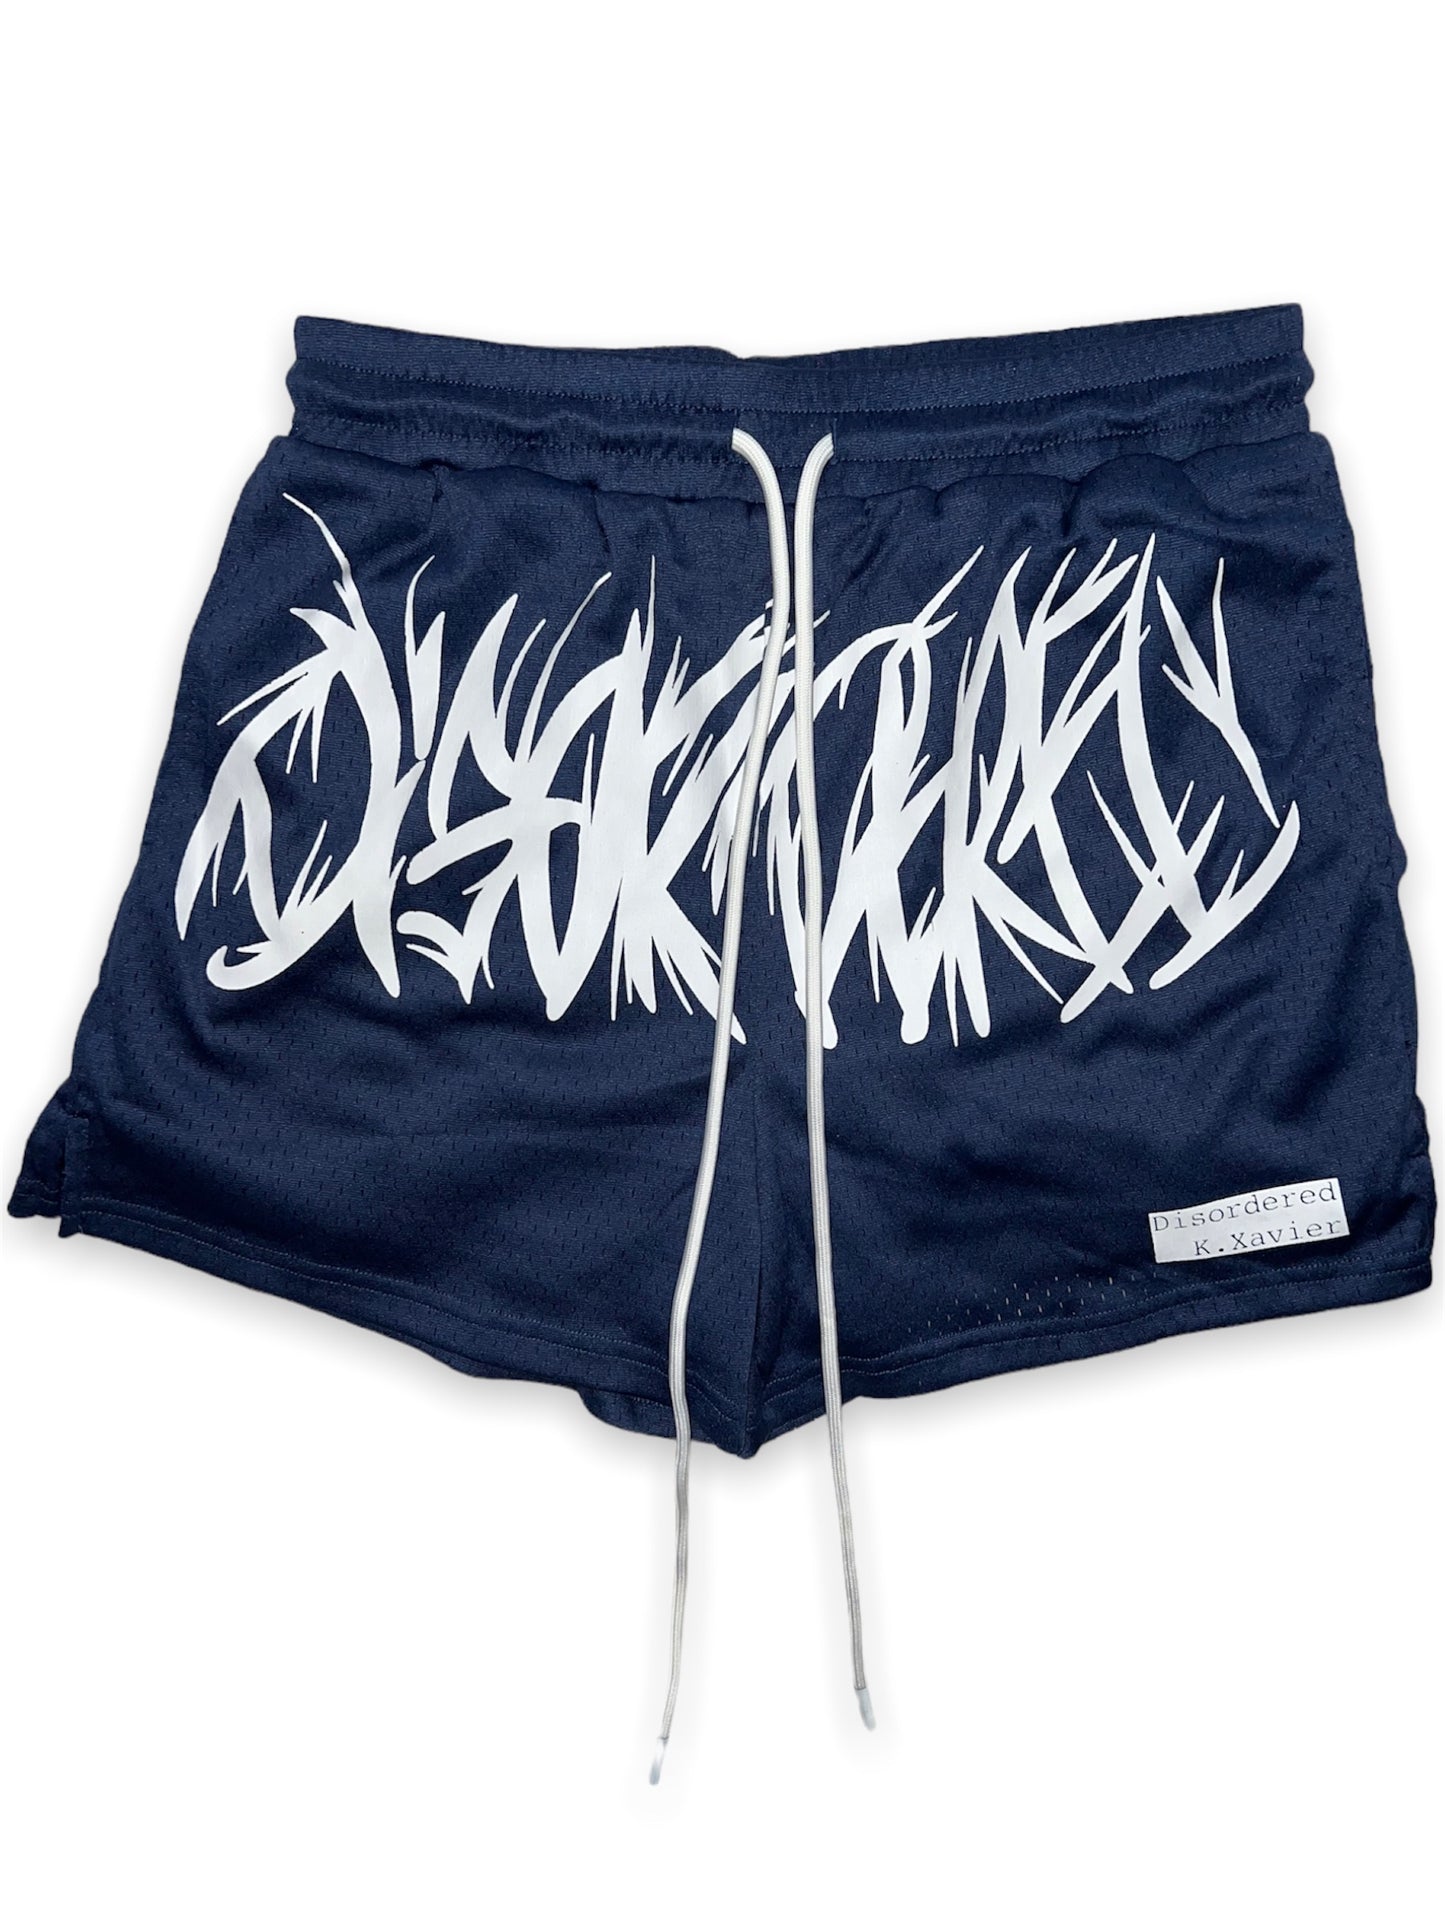 NAVY BLUE DISORDERED SHORTS